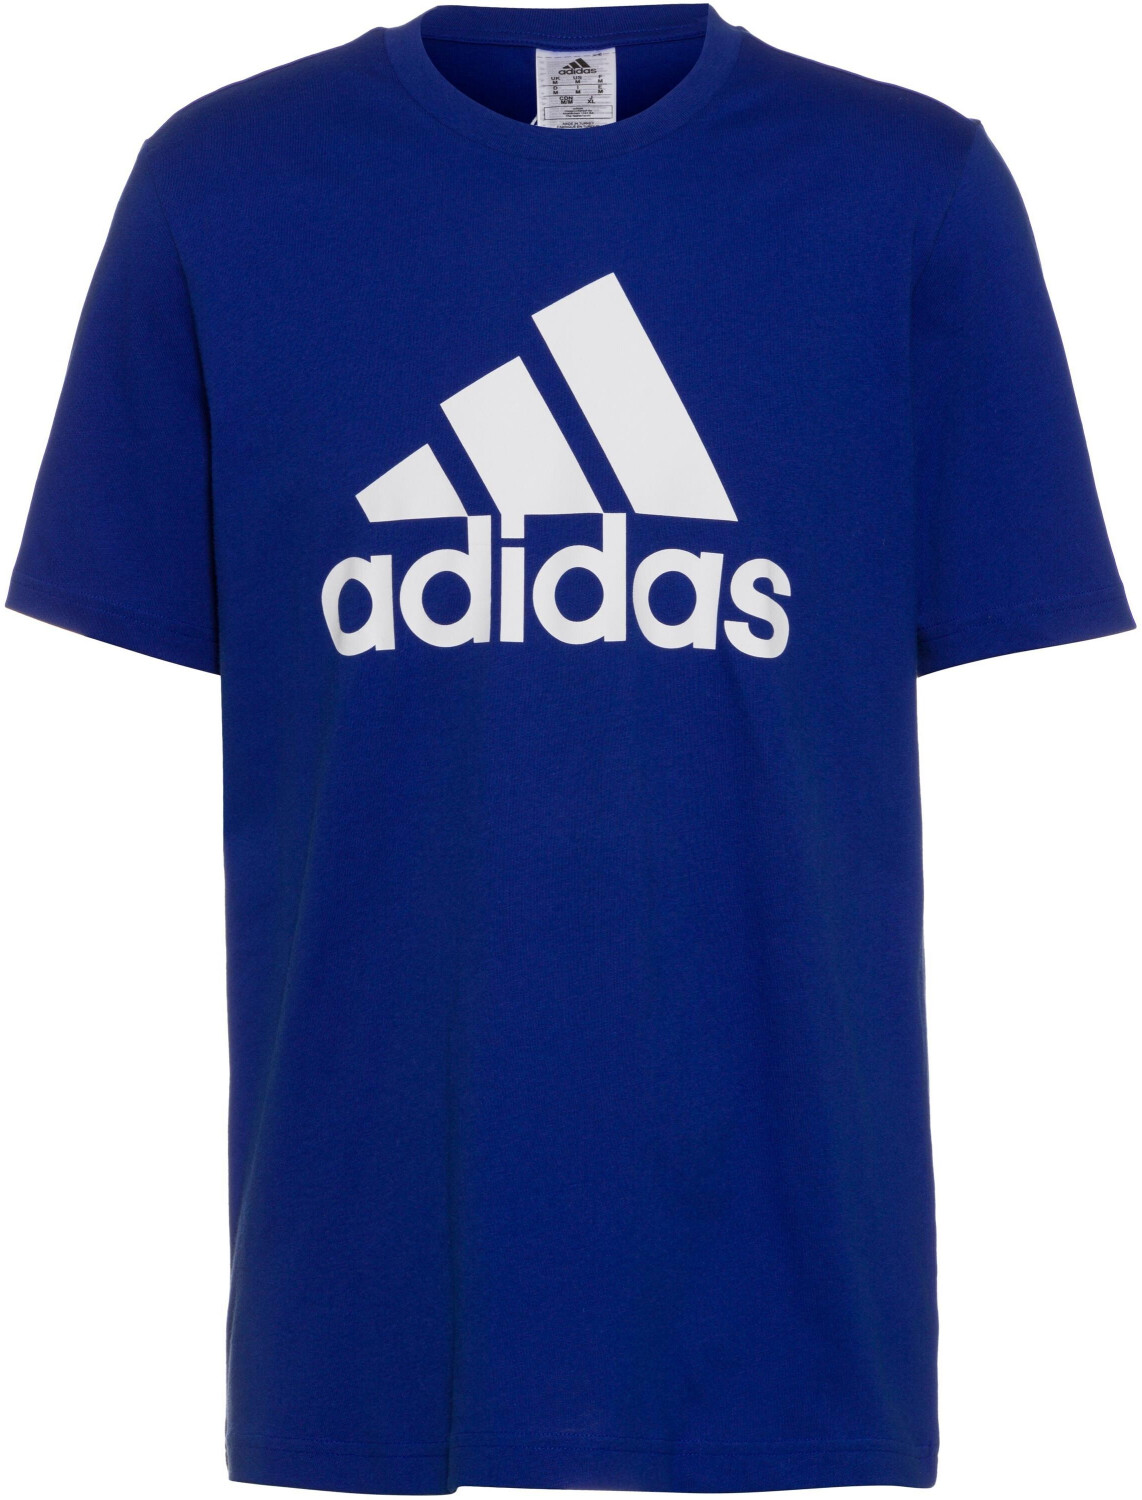 Jersey on Single Best (Today) Deals from Adidas Essentials Logo Buy Big – £11.99 T-Shirt